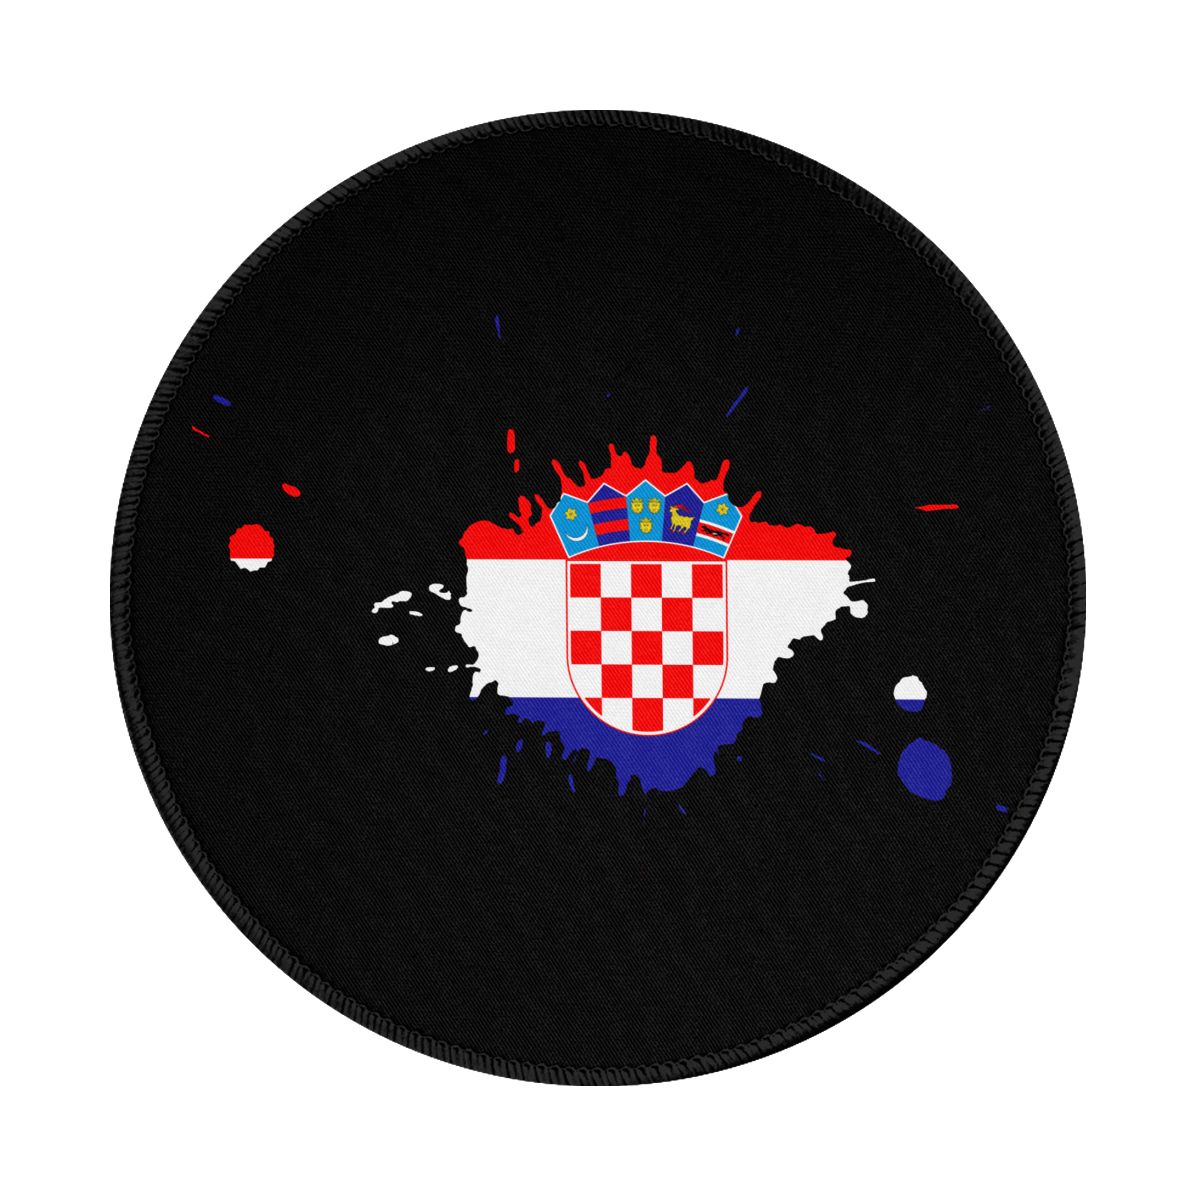 Croatia Ink Spatter Non-Slip Rubber Round Mouse Pad